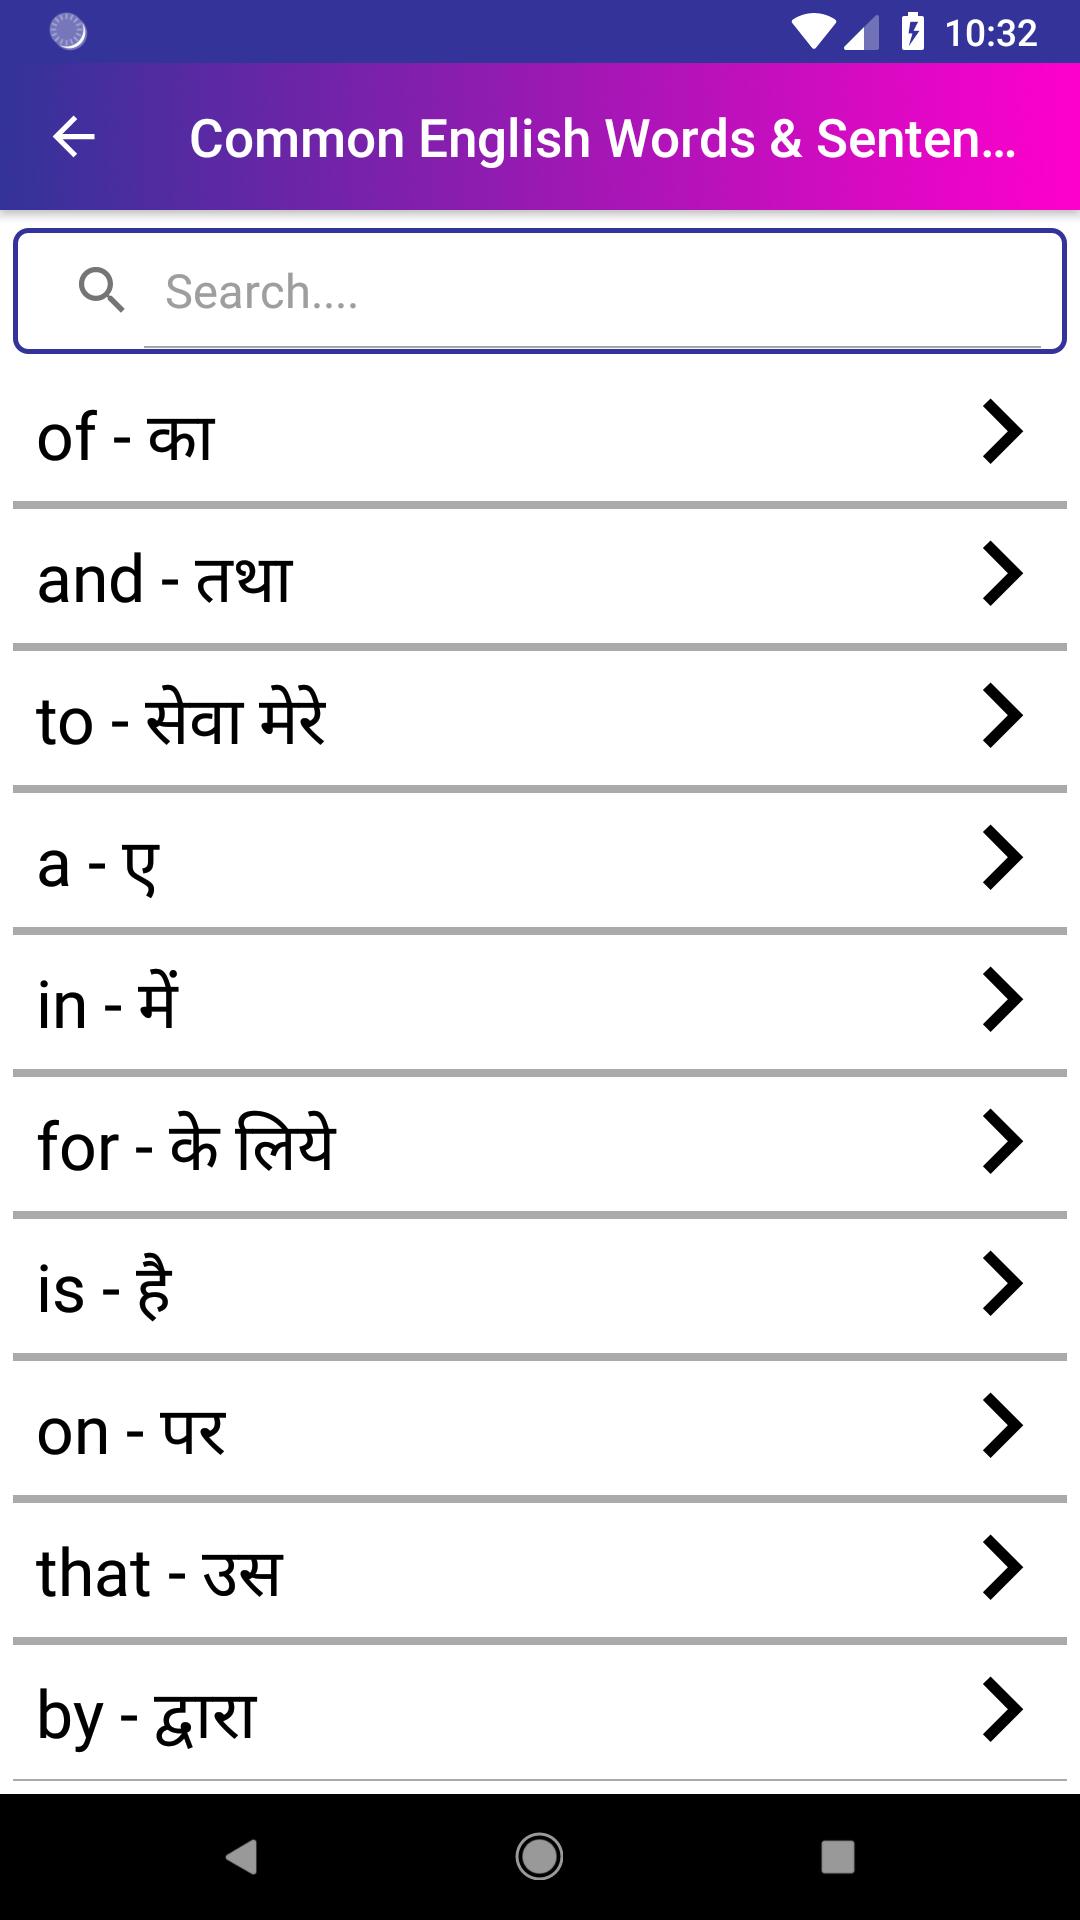 Common English Words Sentence With Hindi Meaning For Android